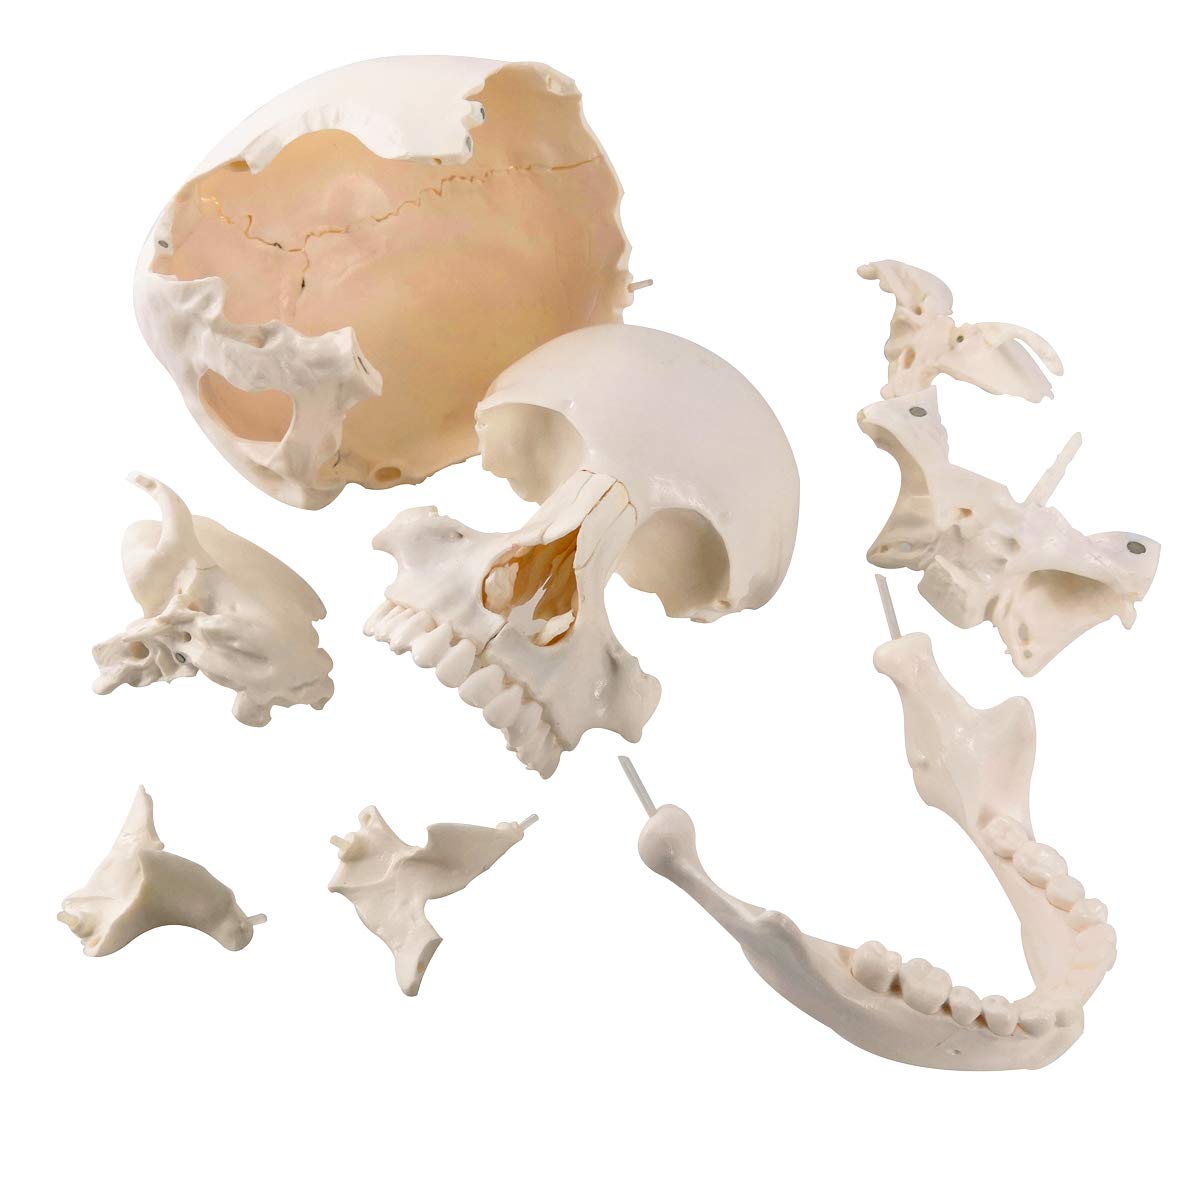 Evotech Scientific Life-Size 22-Part Disarticulated Human Skull Anatom